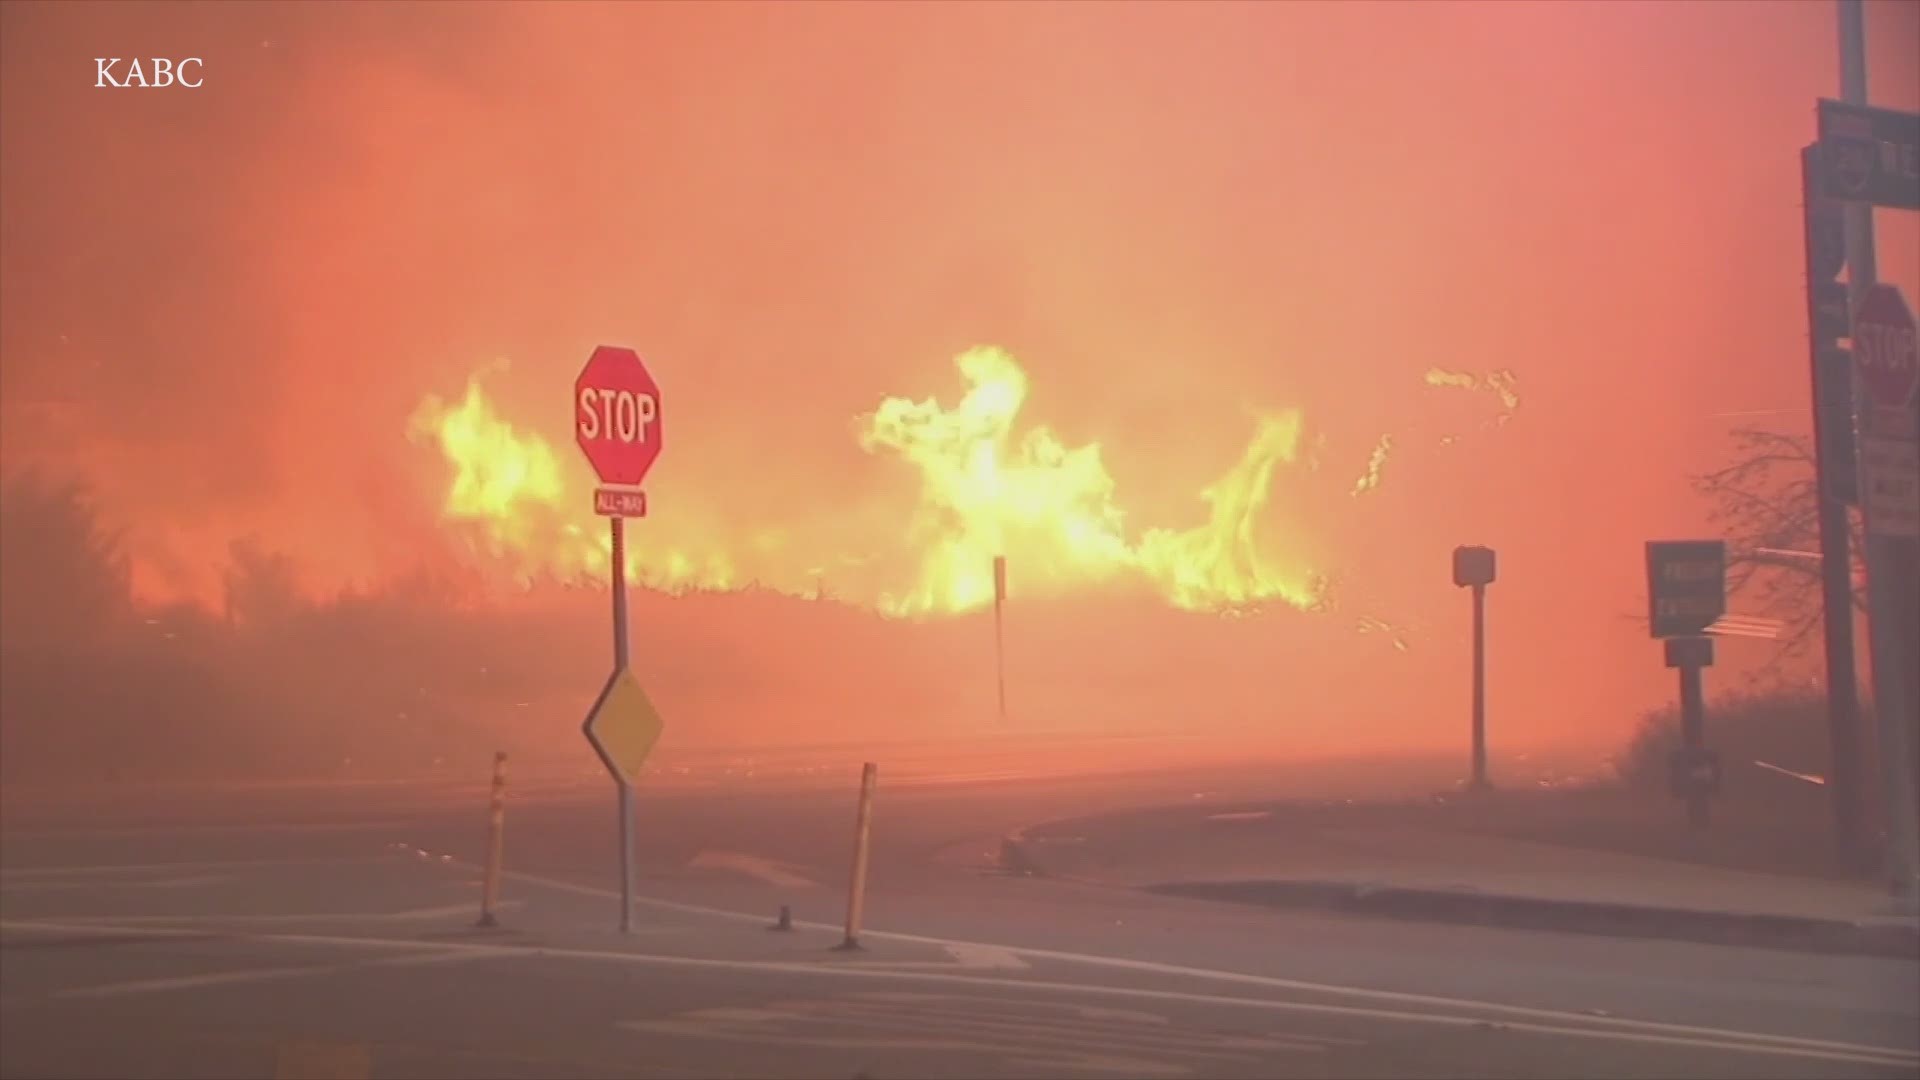 Crews in Los Angeles battled a brush fire that prompted evacuations and closed an interstate in the San Fernando Valley. (Video: KABC via AP)